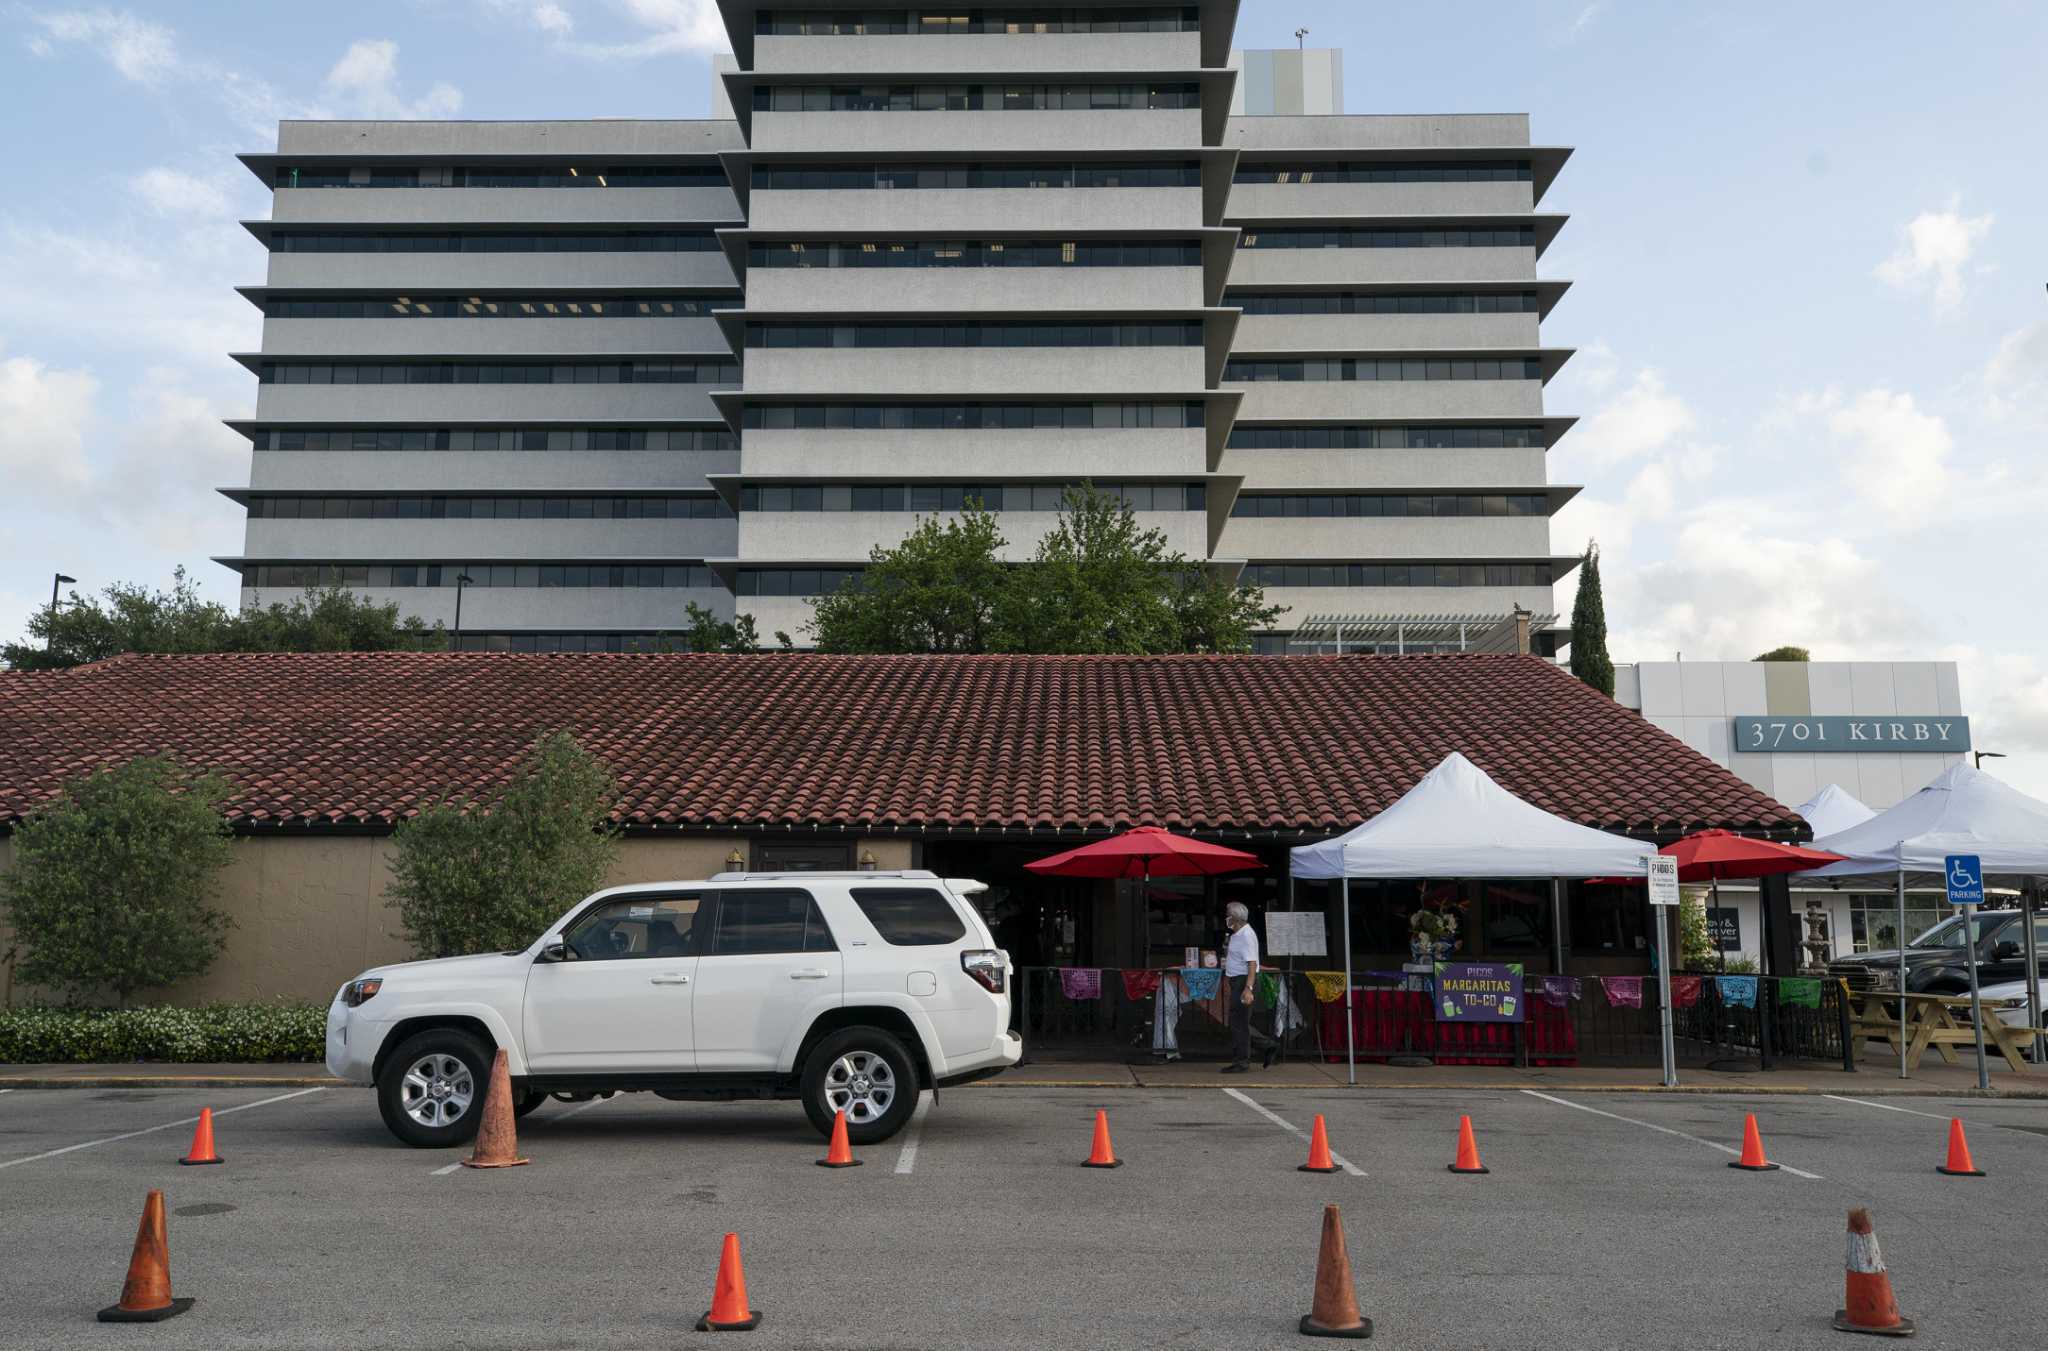 Houston to allow restaurants to convert parking spots into dining space